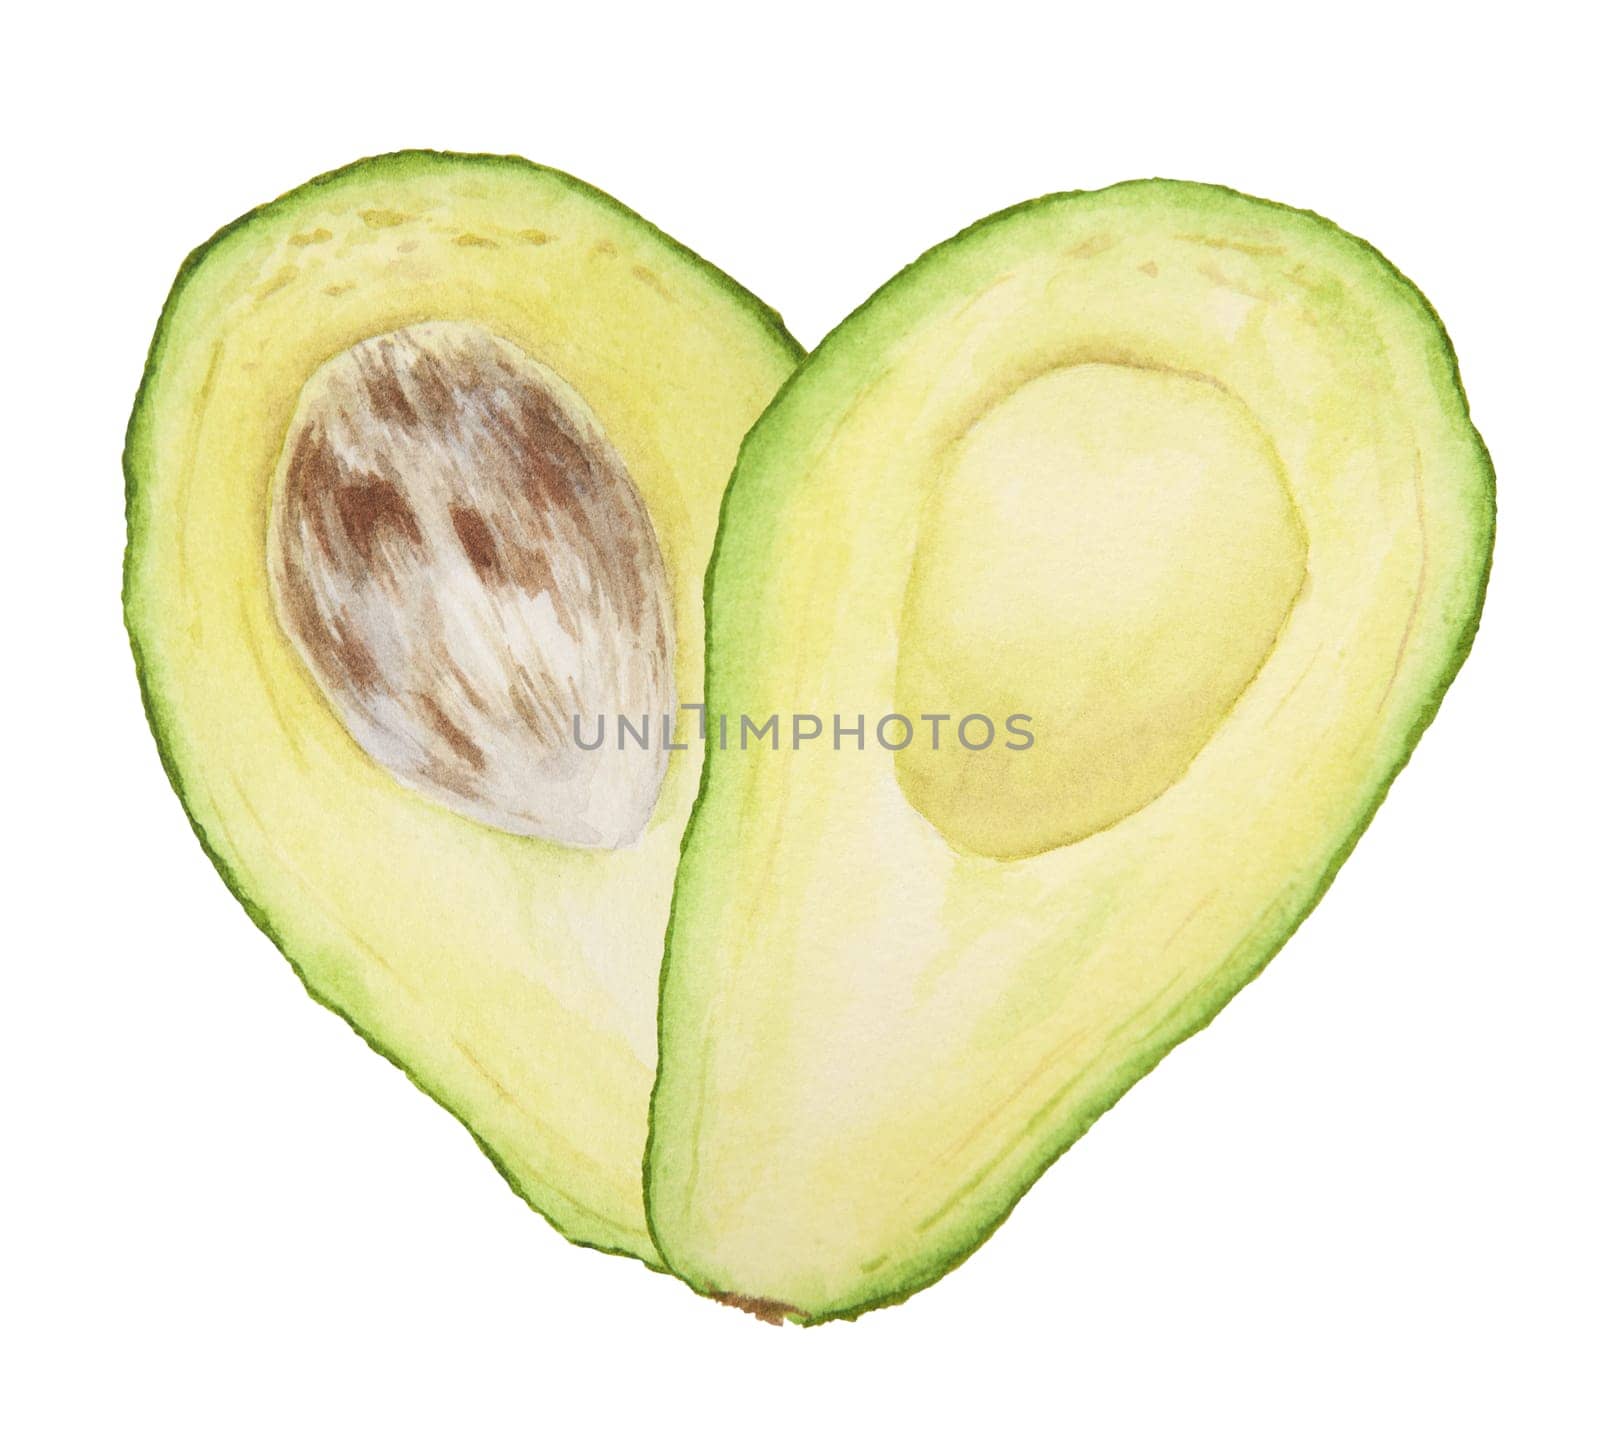 Avocado halfs watercolor hand drawn realistic illustration. Green and fresh art of salad, sauce, guacamole, smoothie ingredient. For textile, menu, cards, paper, package, cooking books design